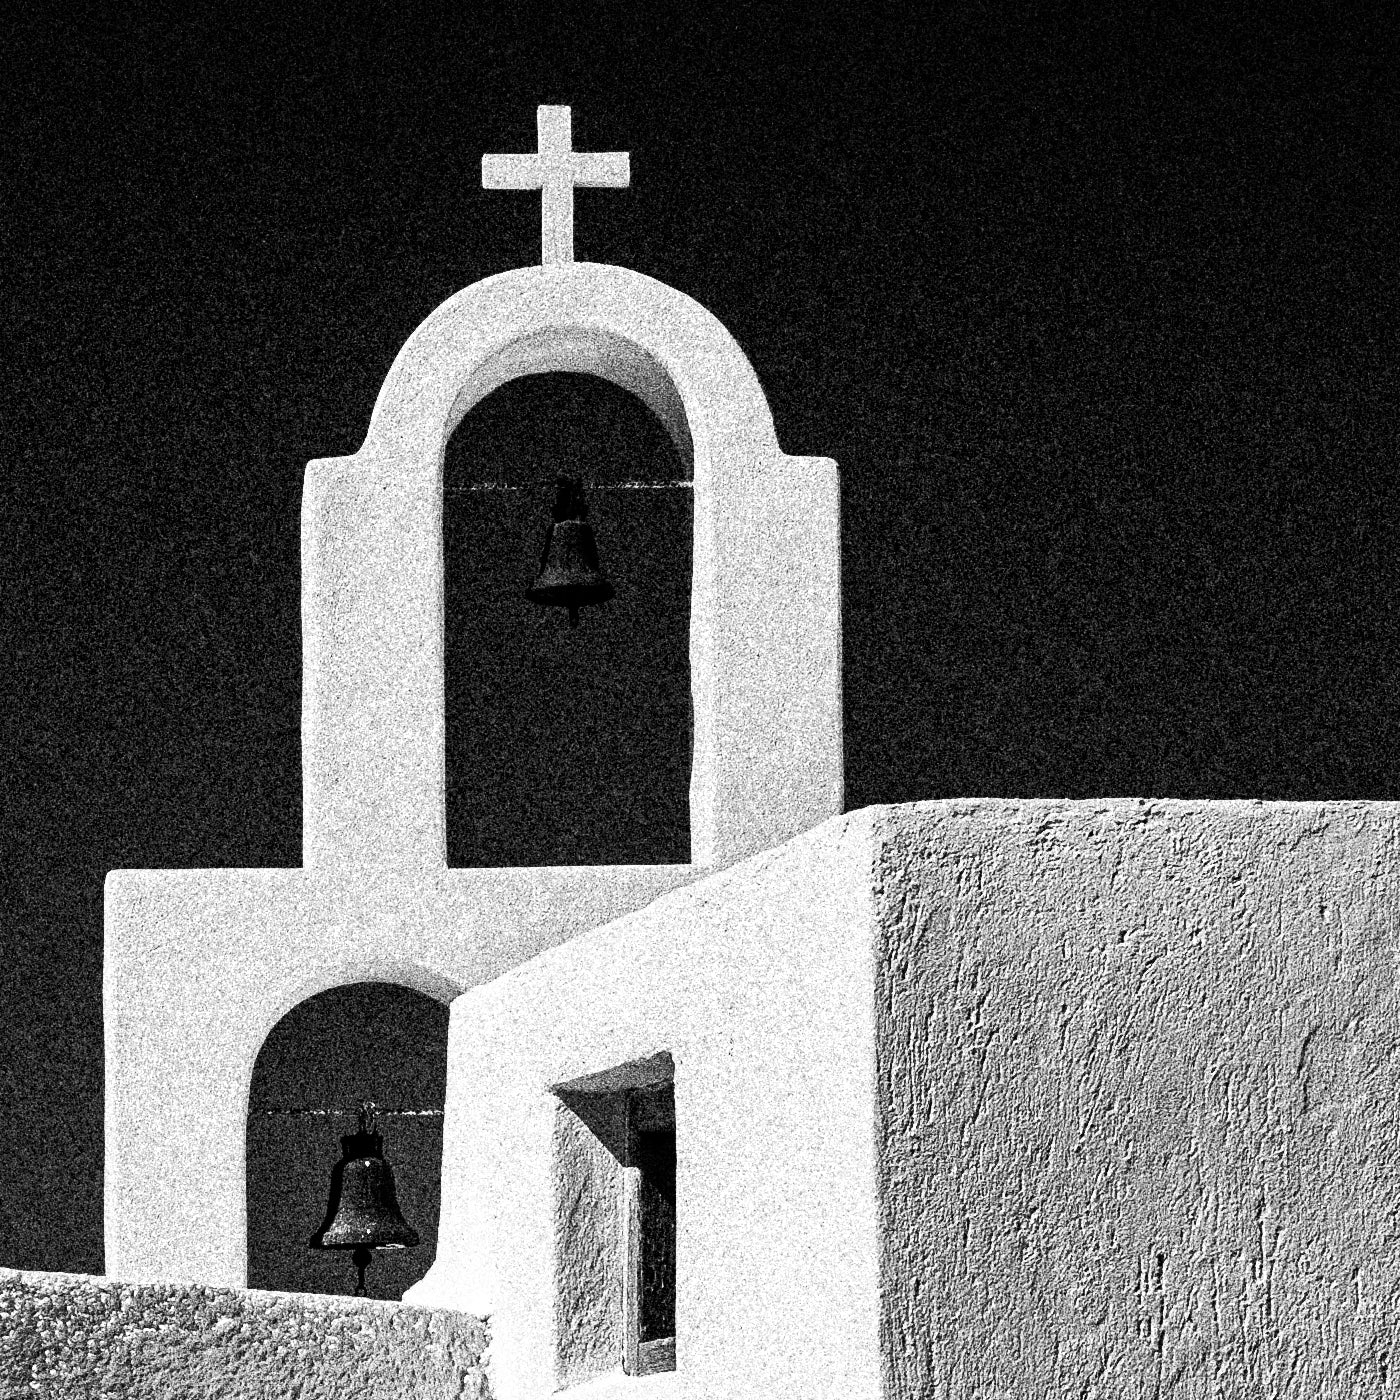 Black and White Photography Wall Art from Greece - Santorini Chorōs by George Tatakis